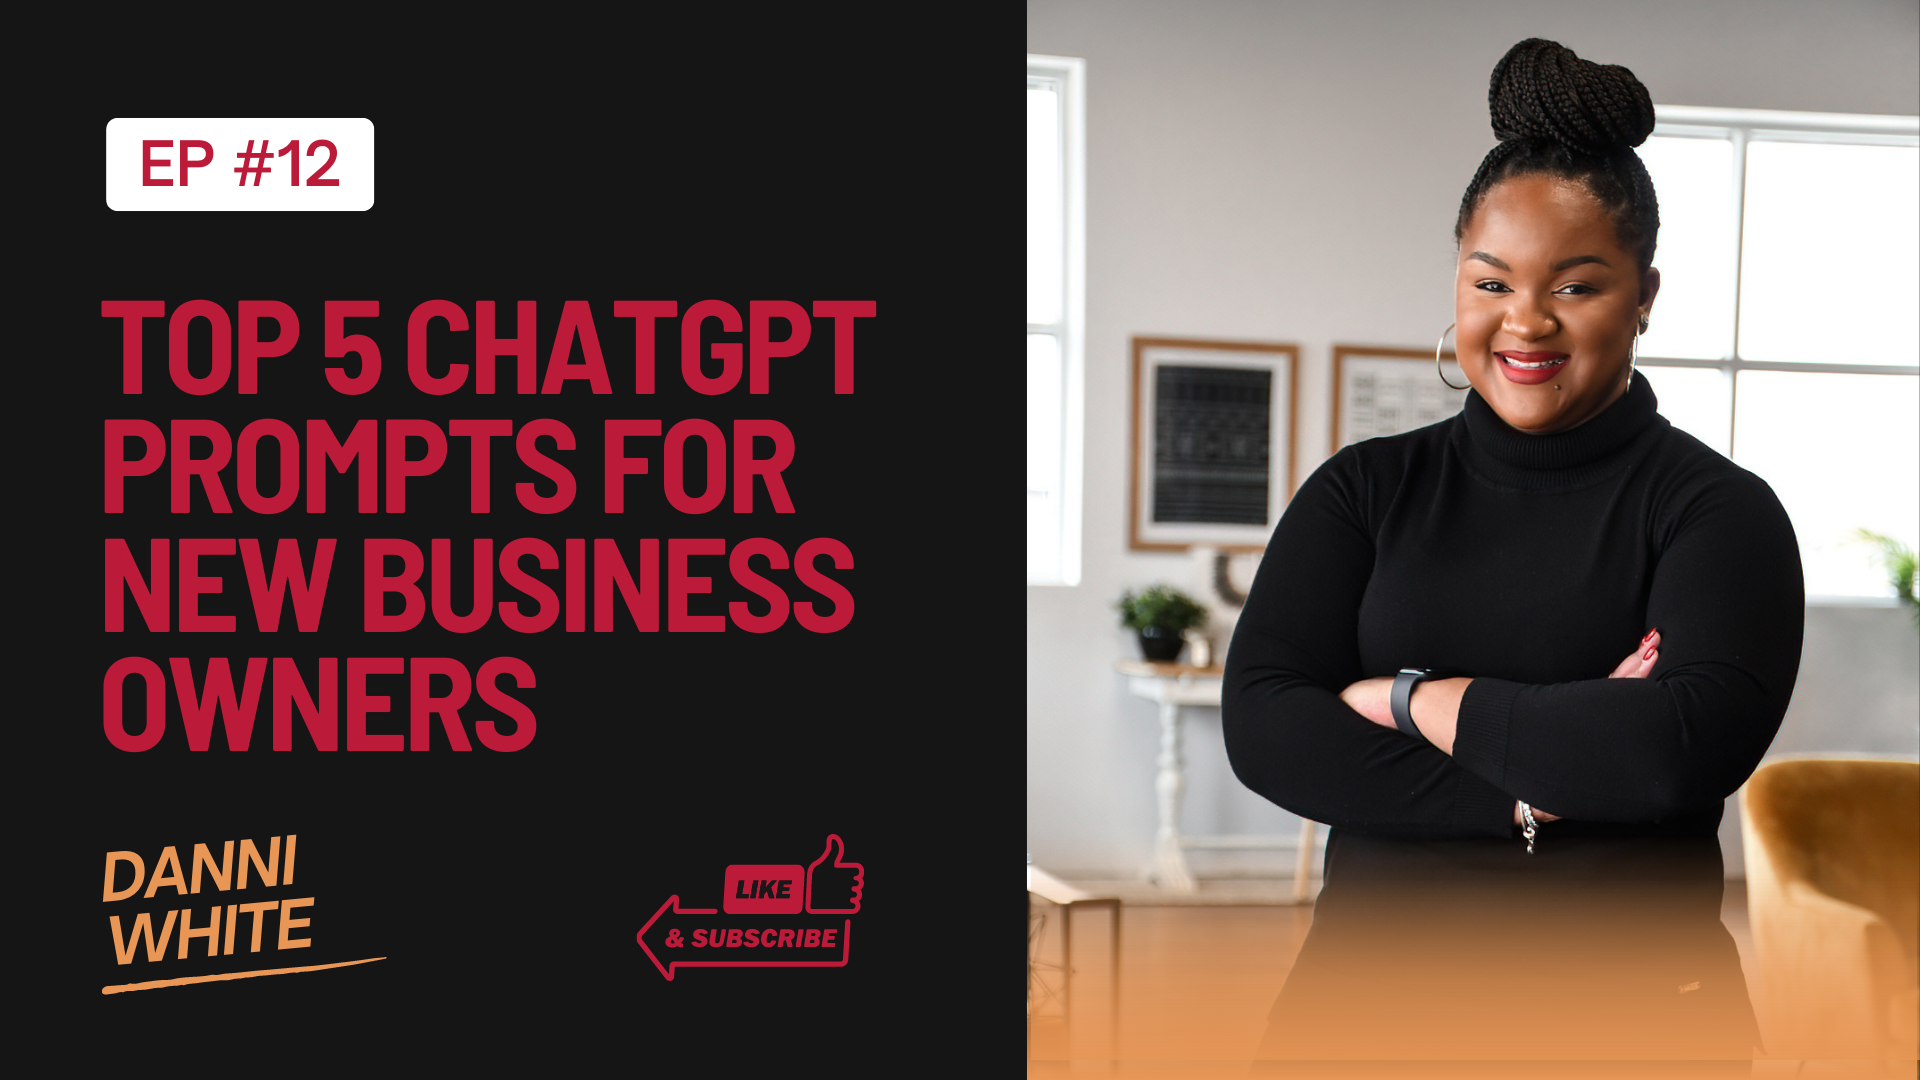 Episode #12: Top 5 ChatGPT Prompts for New Business Owners